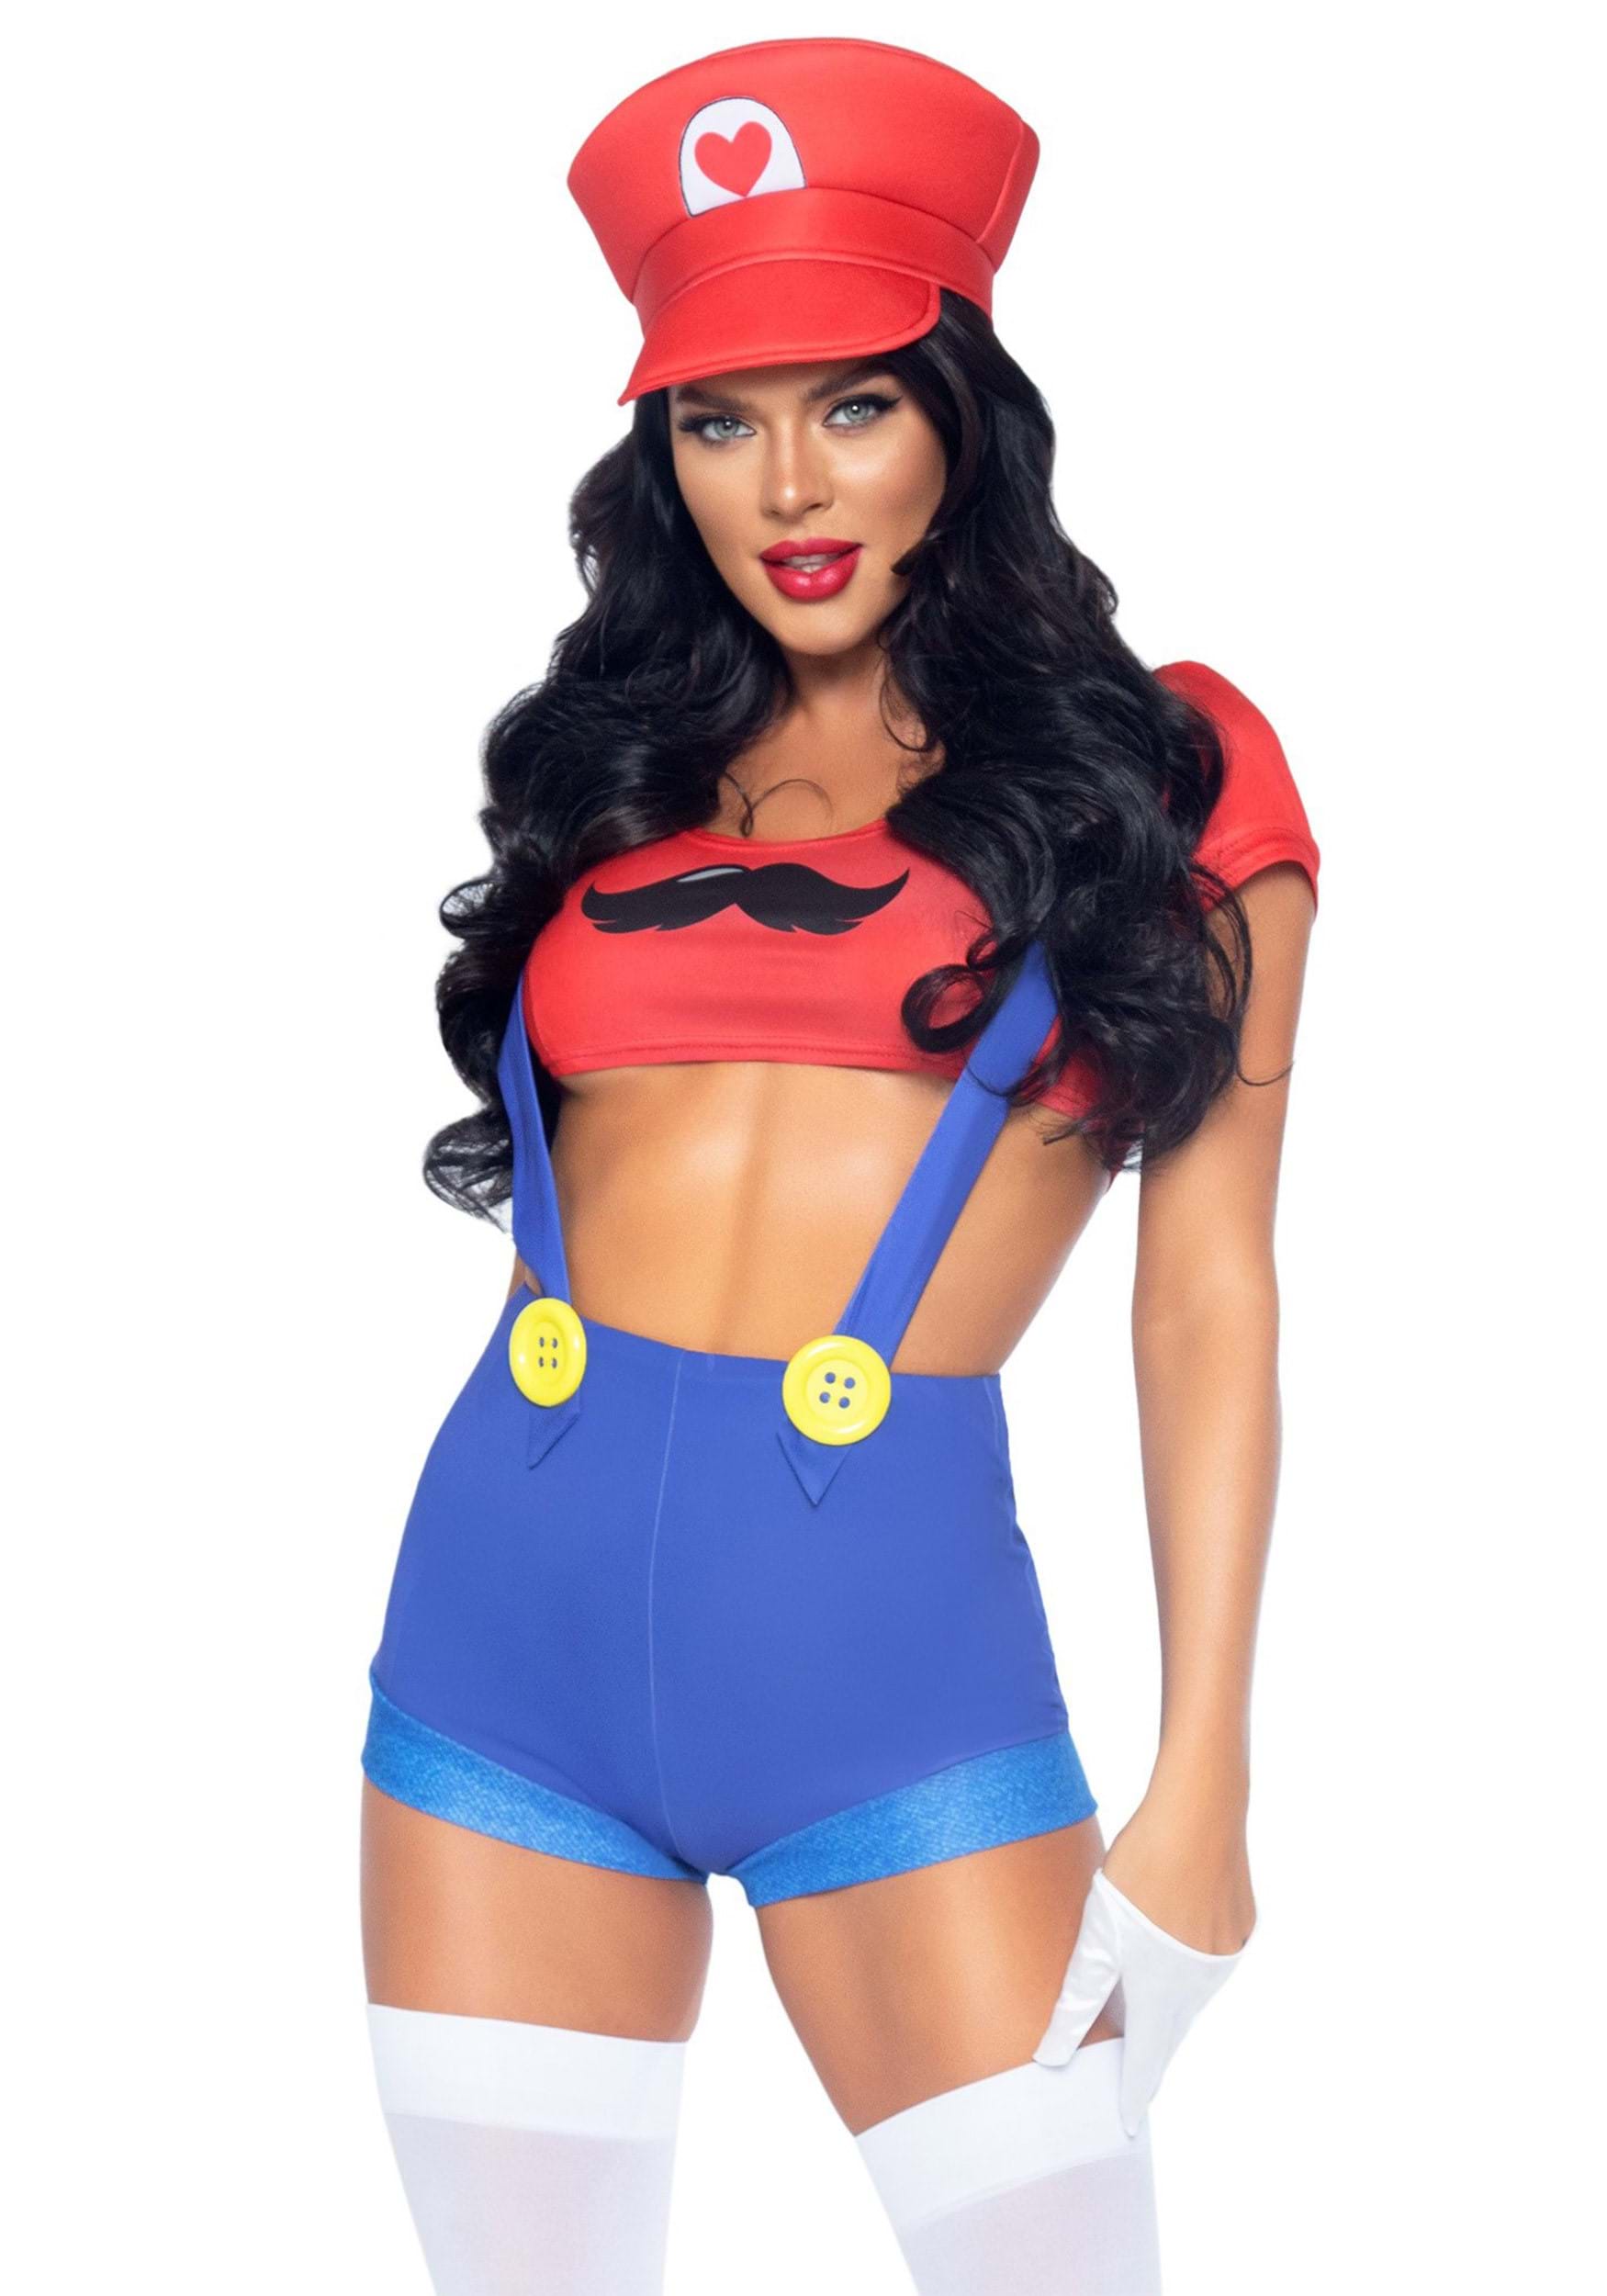 https://images.halloweencostumes.ca/products/72998/1-1/sexy-piece-red-gamer-babe-womens-costume.jpg